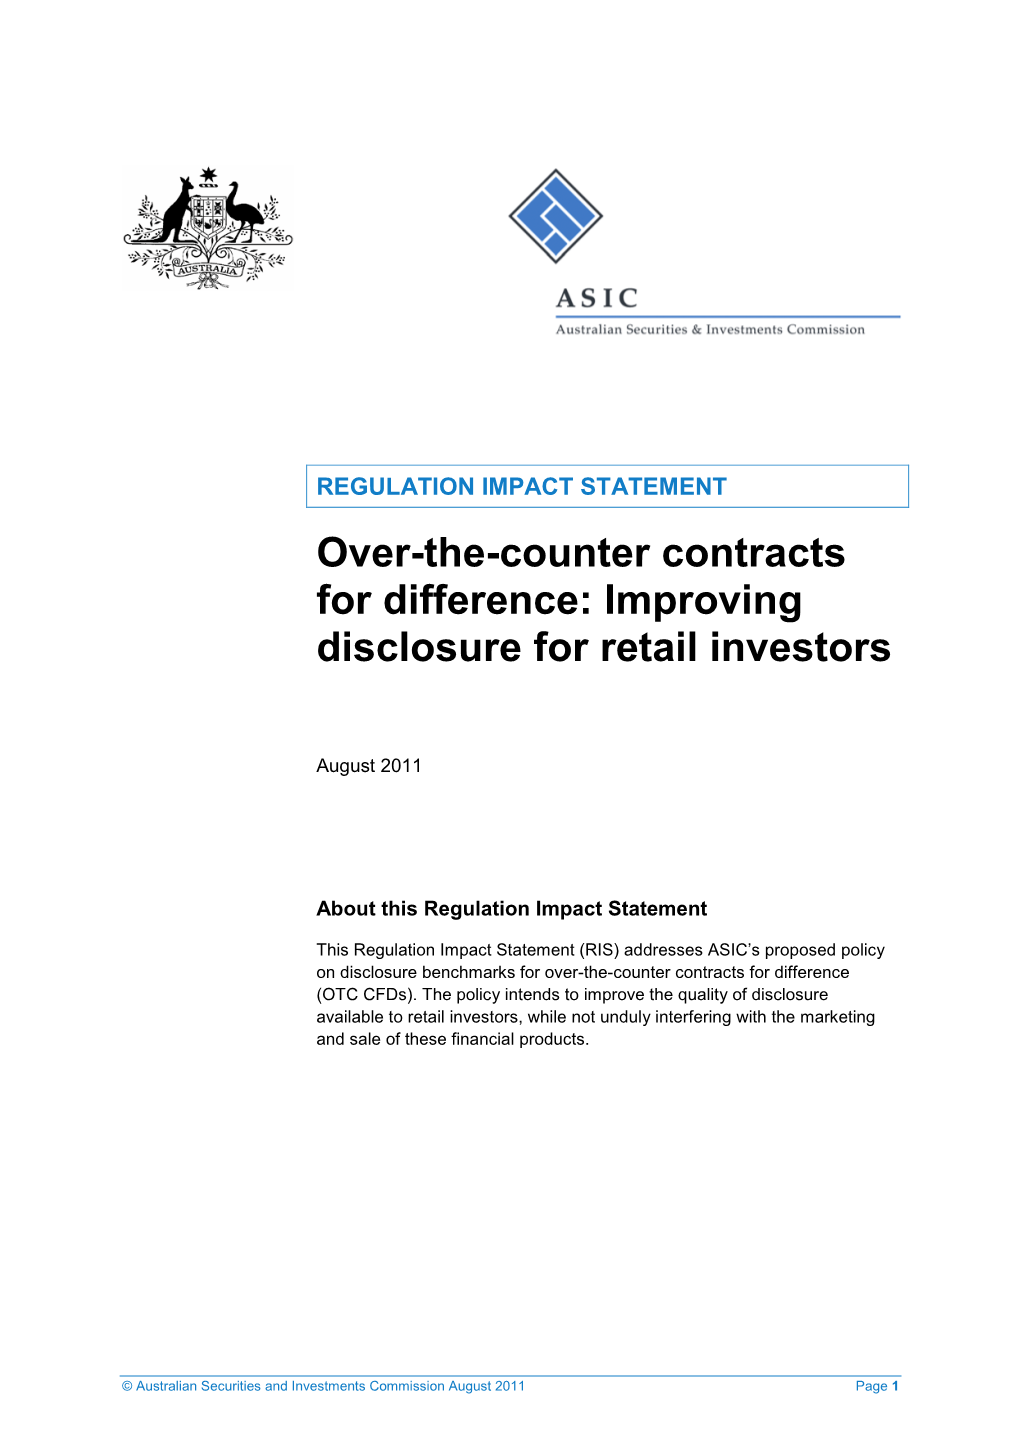 Over-The-Counter Contracts for Difference: Improving Disclosure for Retail Investors